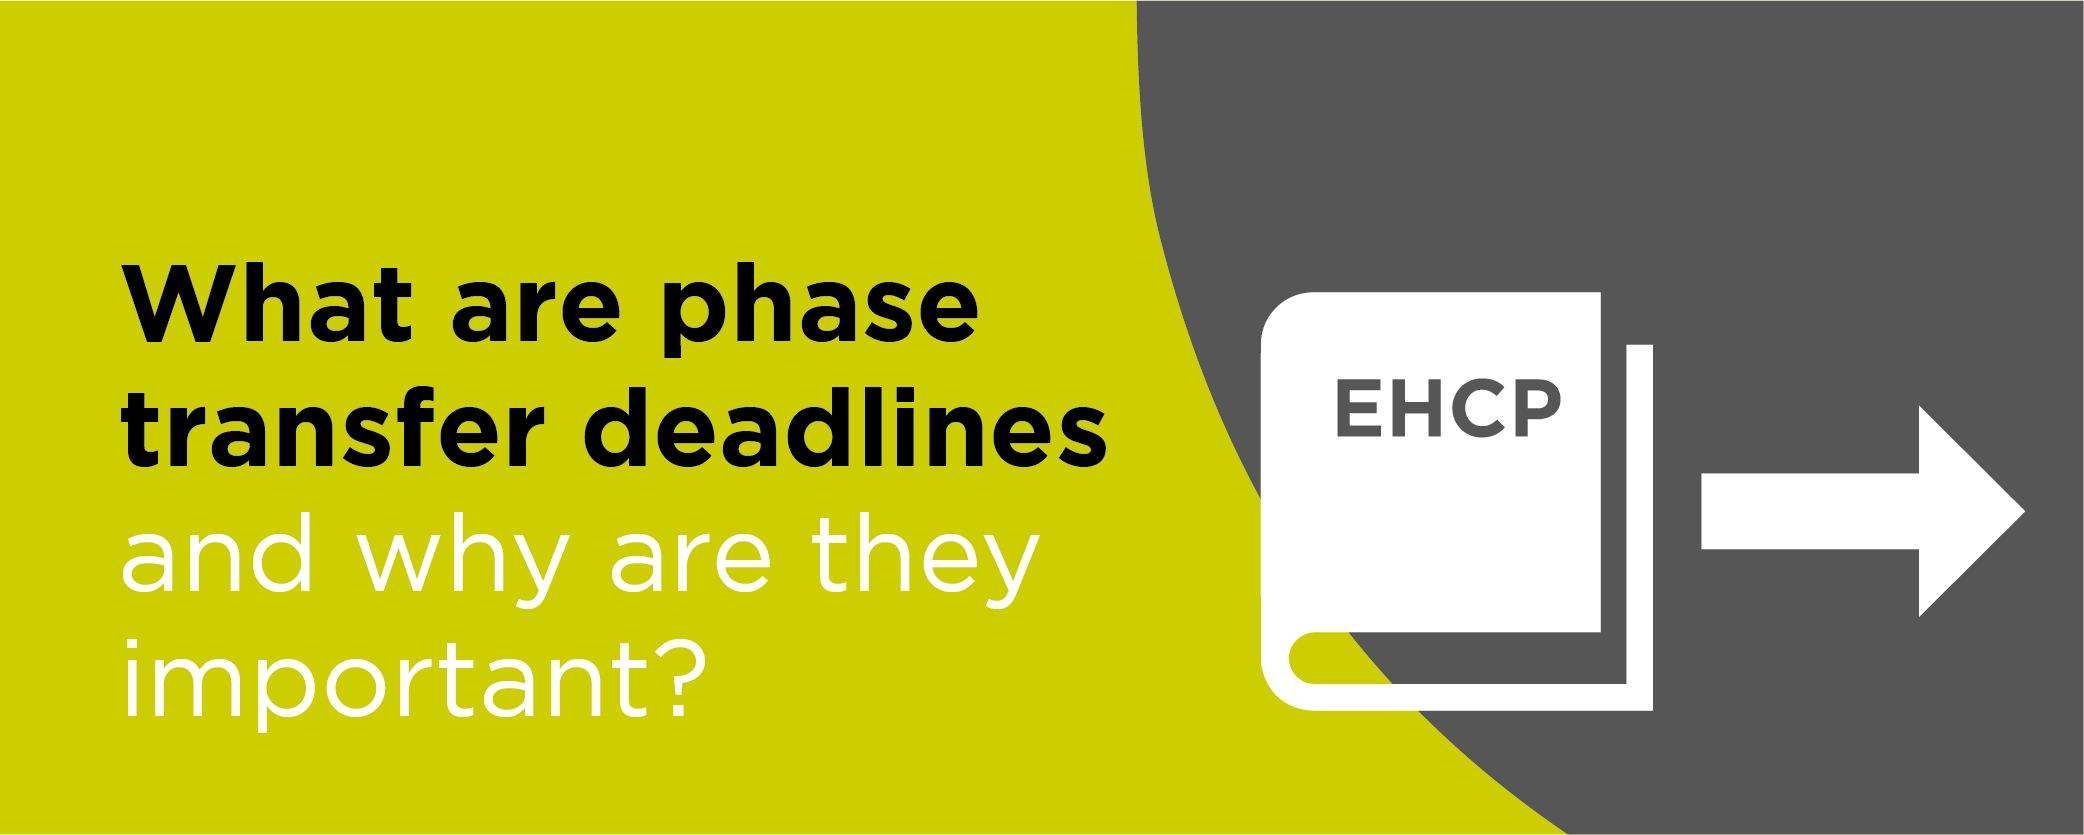 What are phase transfer deadlines and why are they important?